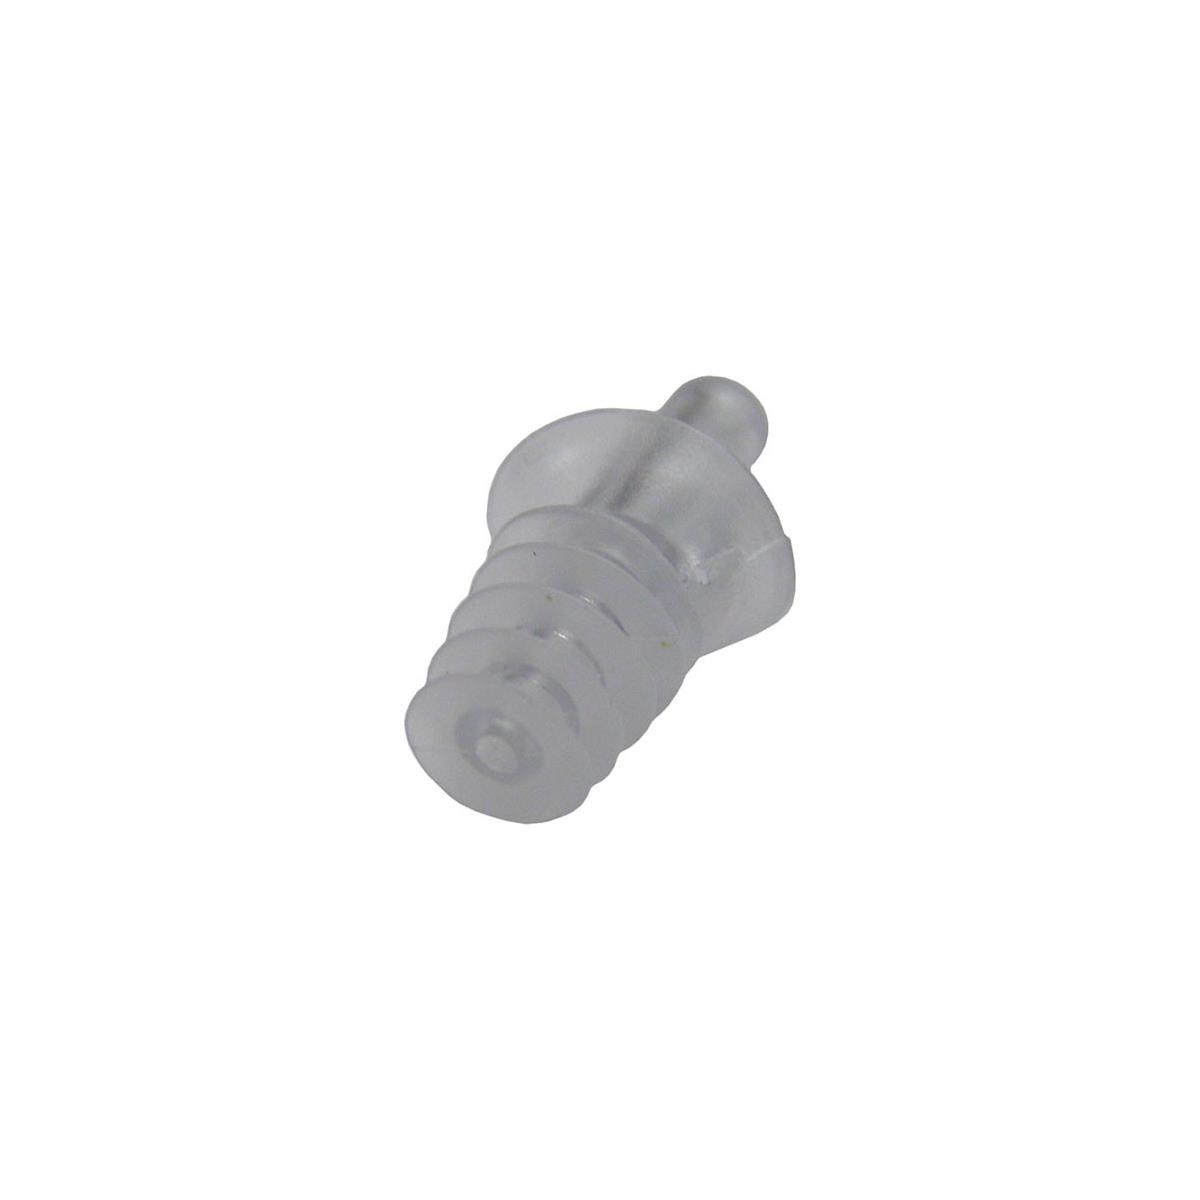 Image of Voice Technologies Accordion Smaller Earpiece for Monitoring Applications